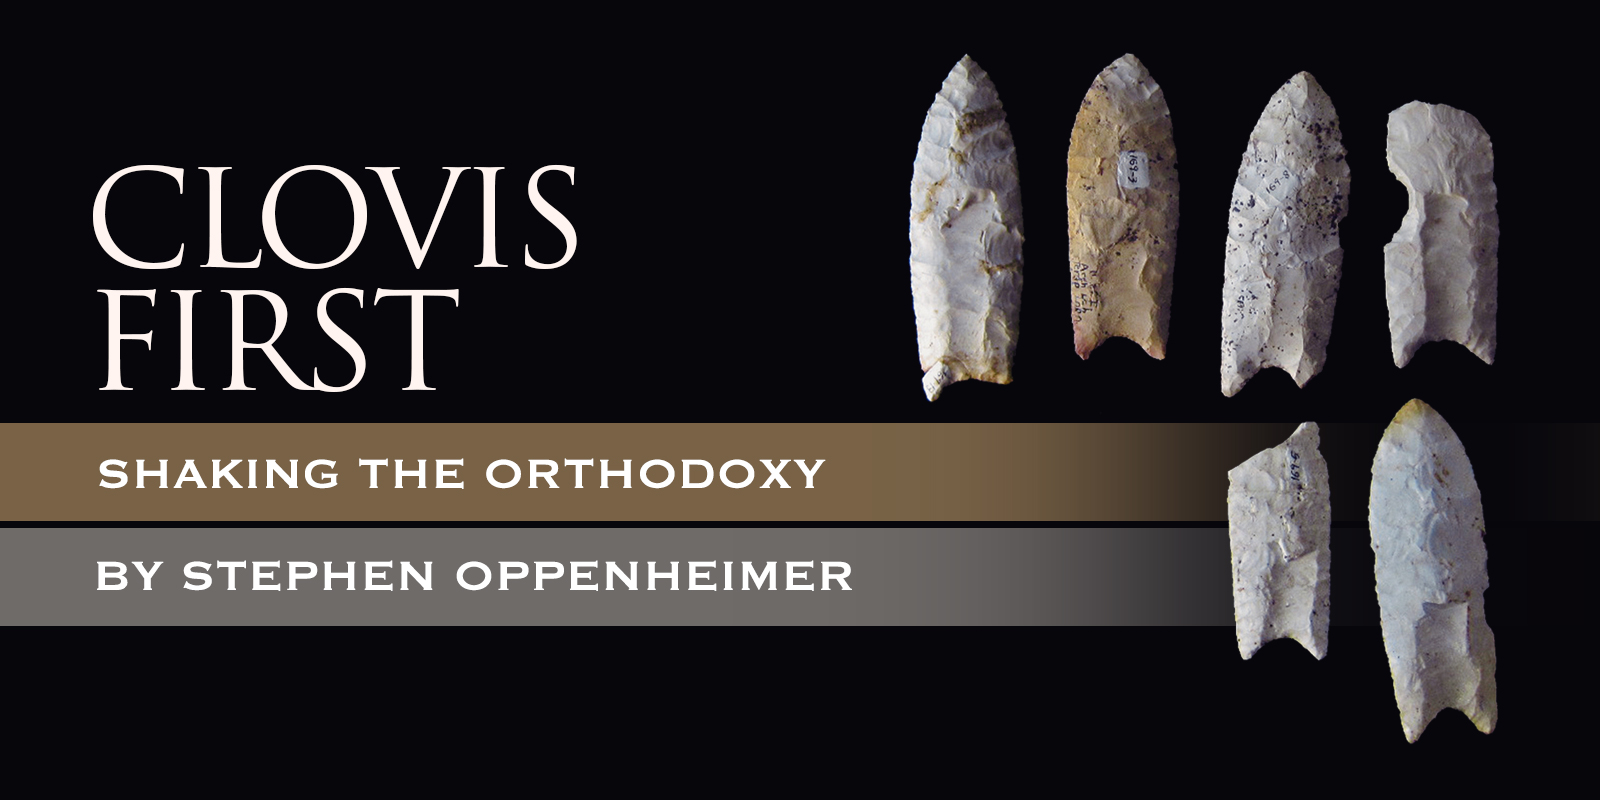 Clovis First: Shaking the Orthodoxy